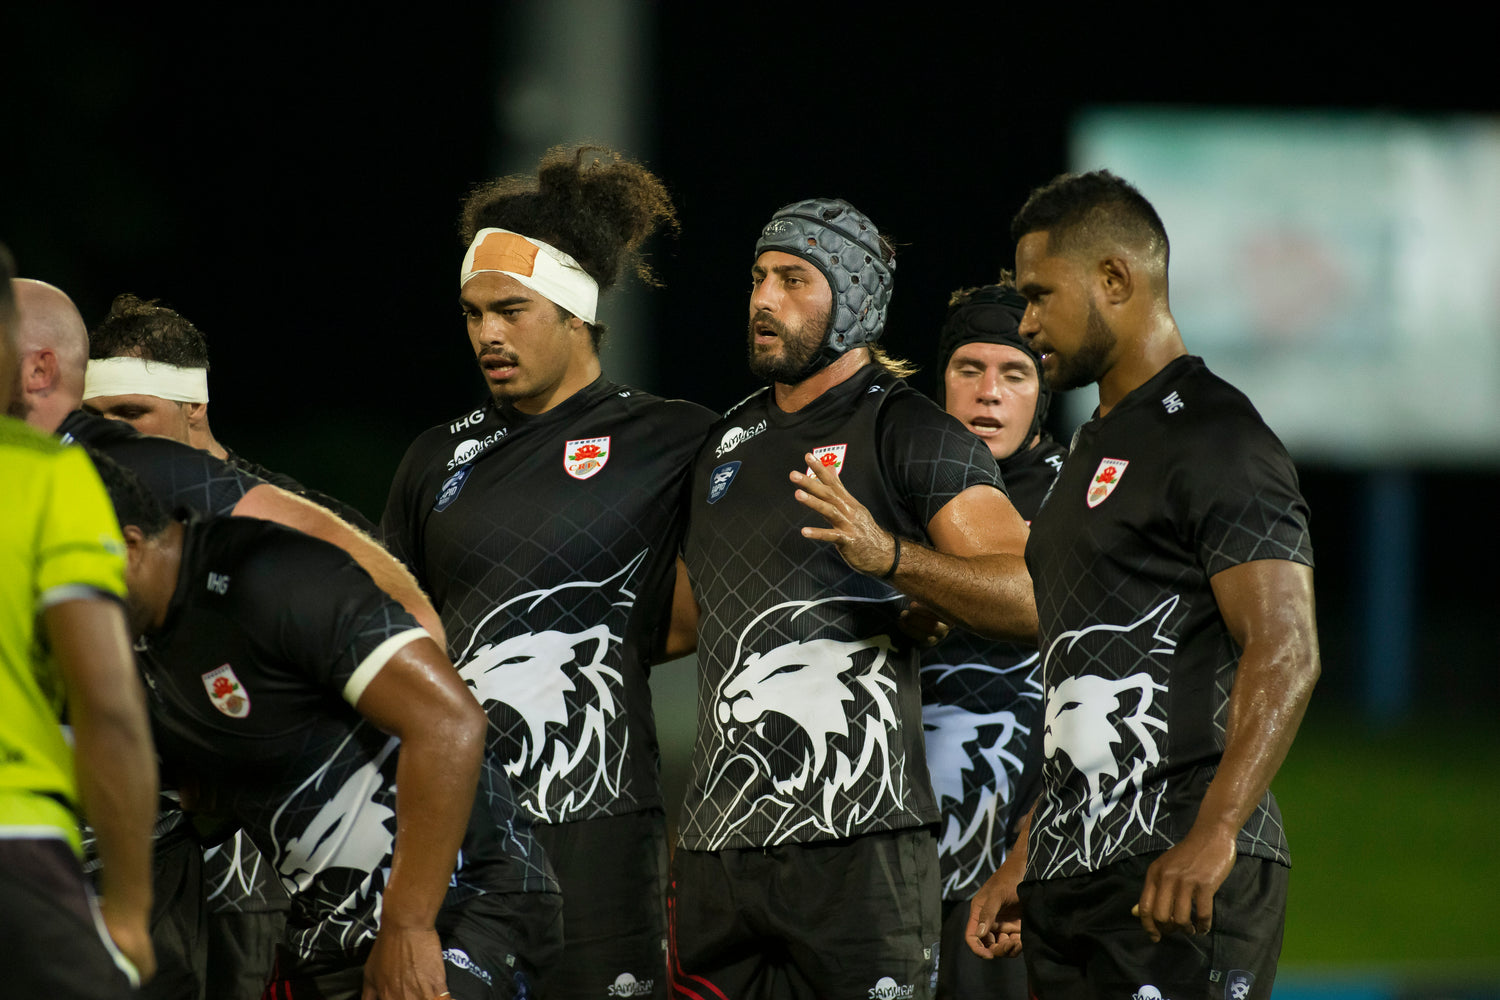 ASIA’S NEWEST PROFESSIONAL RUGBY TEAM SELECTS SAMURAI SPORTSWEAR AS ITS OFFICIAL PARTNER